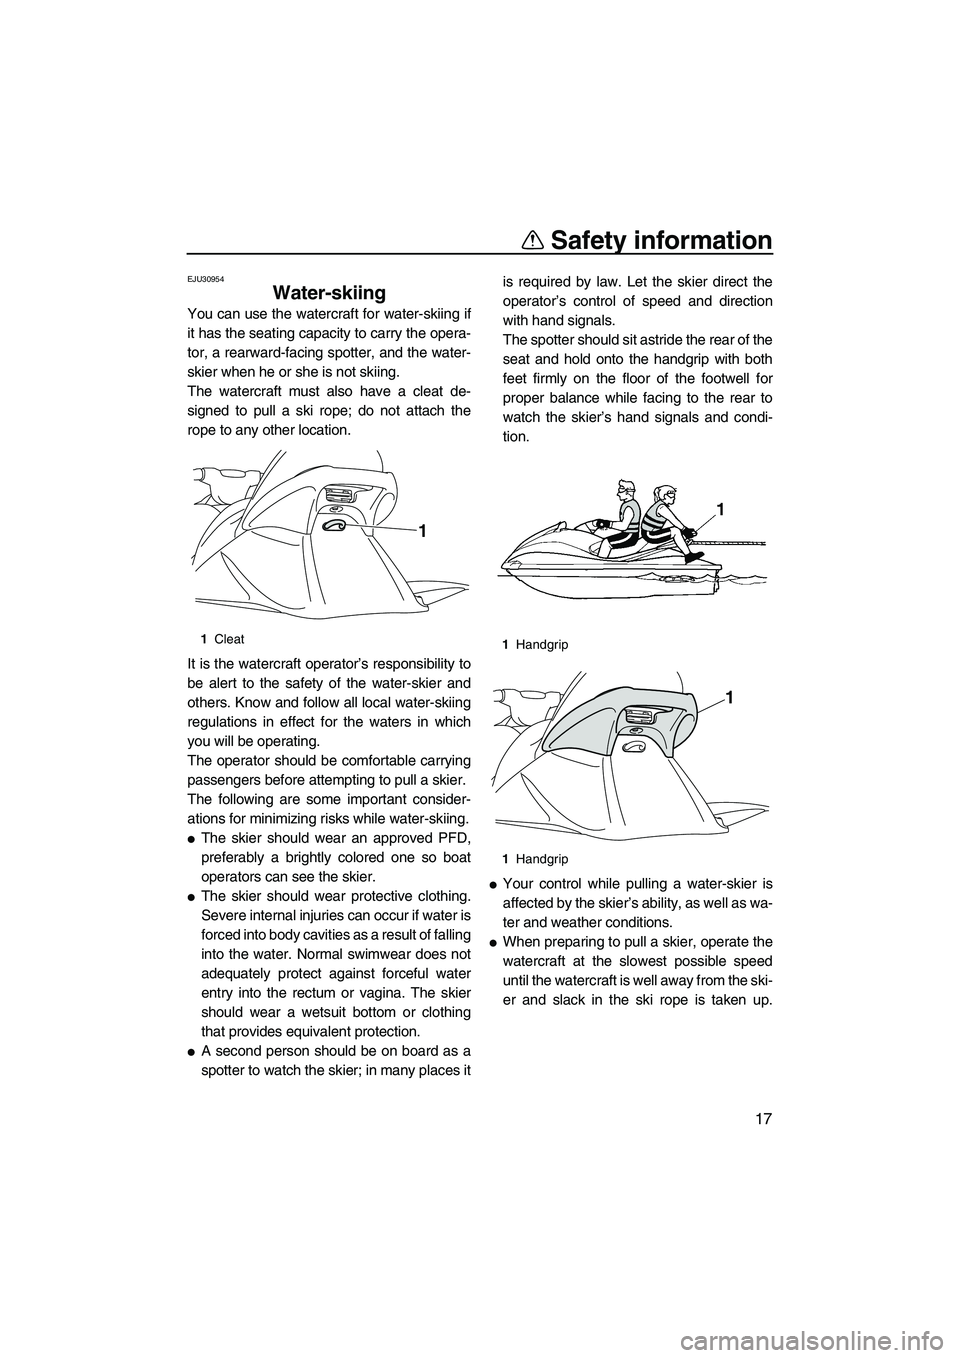 YAMAHA VX SPORT 2013 Owners Manual Safety information
17
EJU30954
Water-skiing 
You can use the watercraft for water-skiing if
it has the seating capacity to carry the opera-
tor, a rearward-facing spotter, and the water-
skier when he